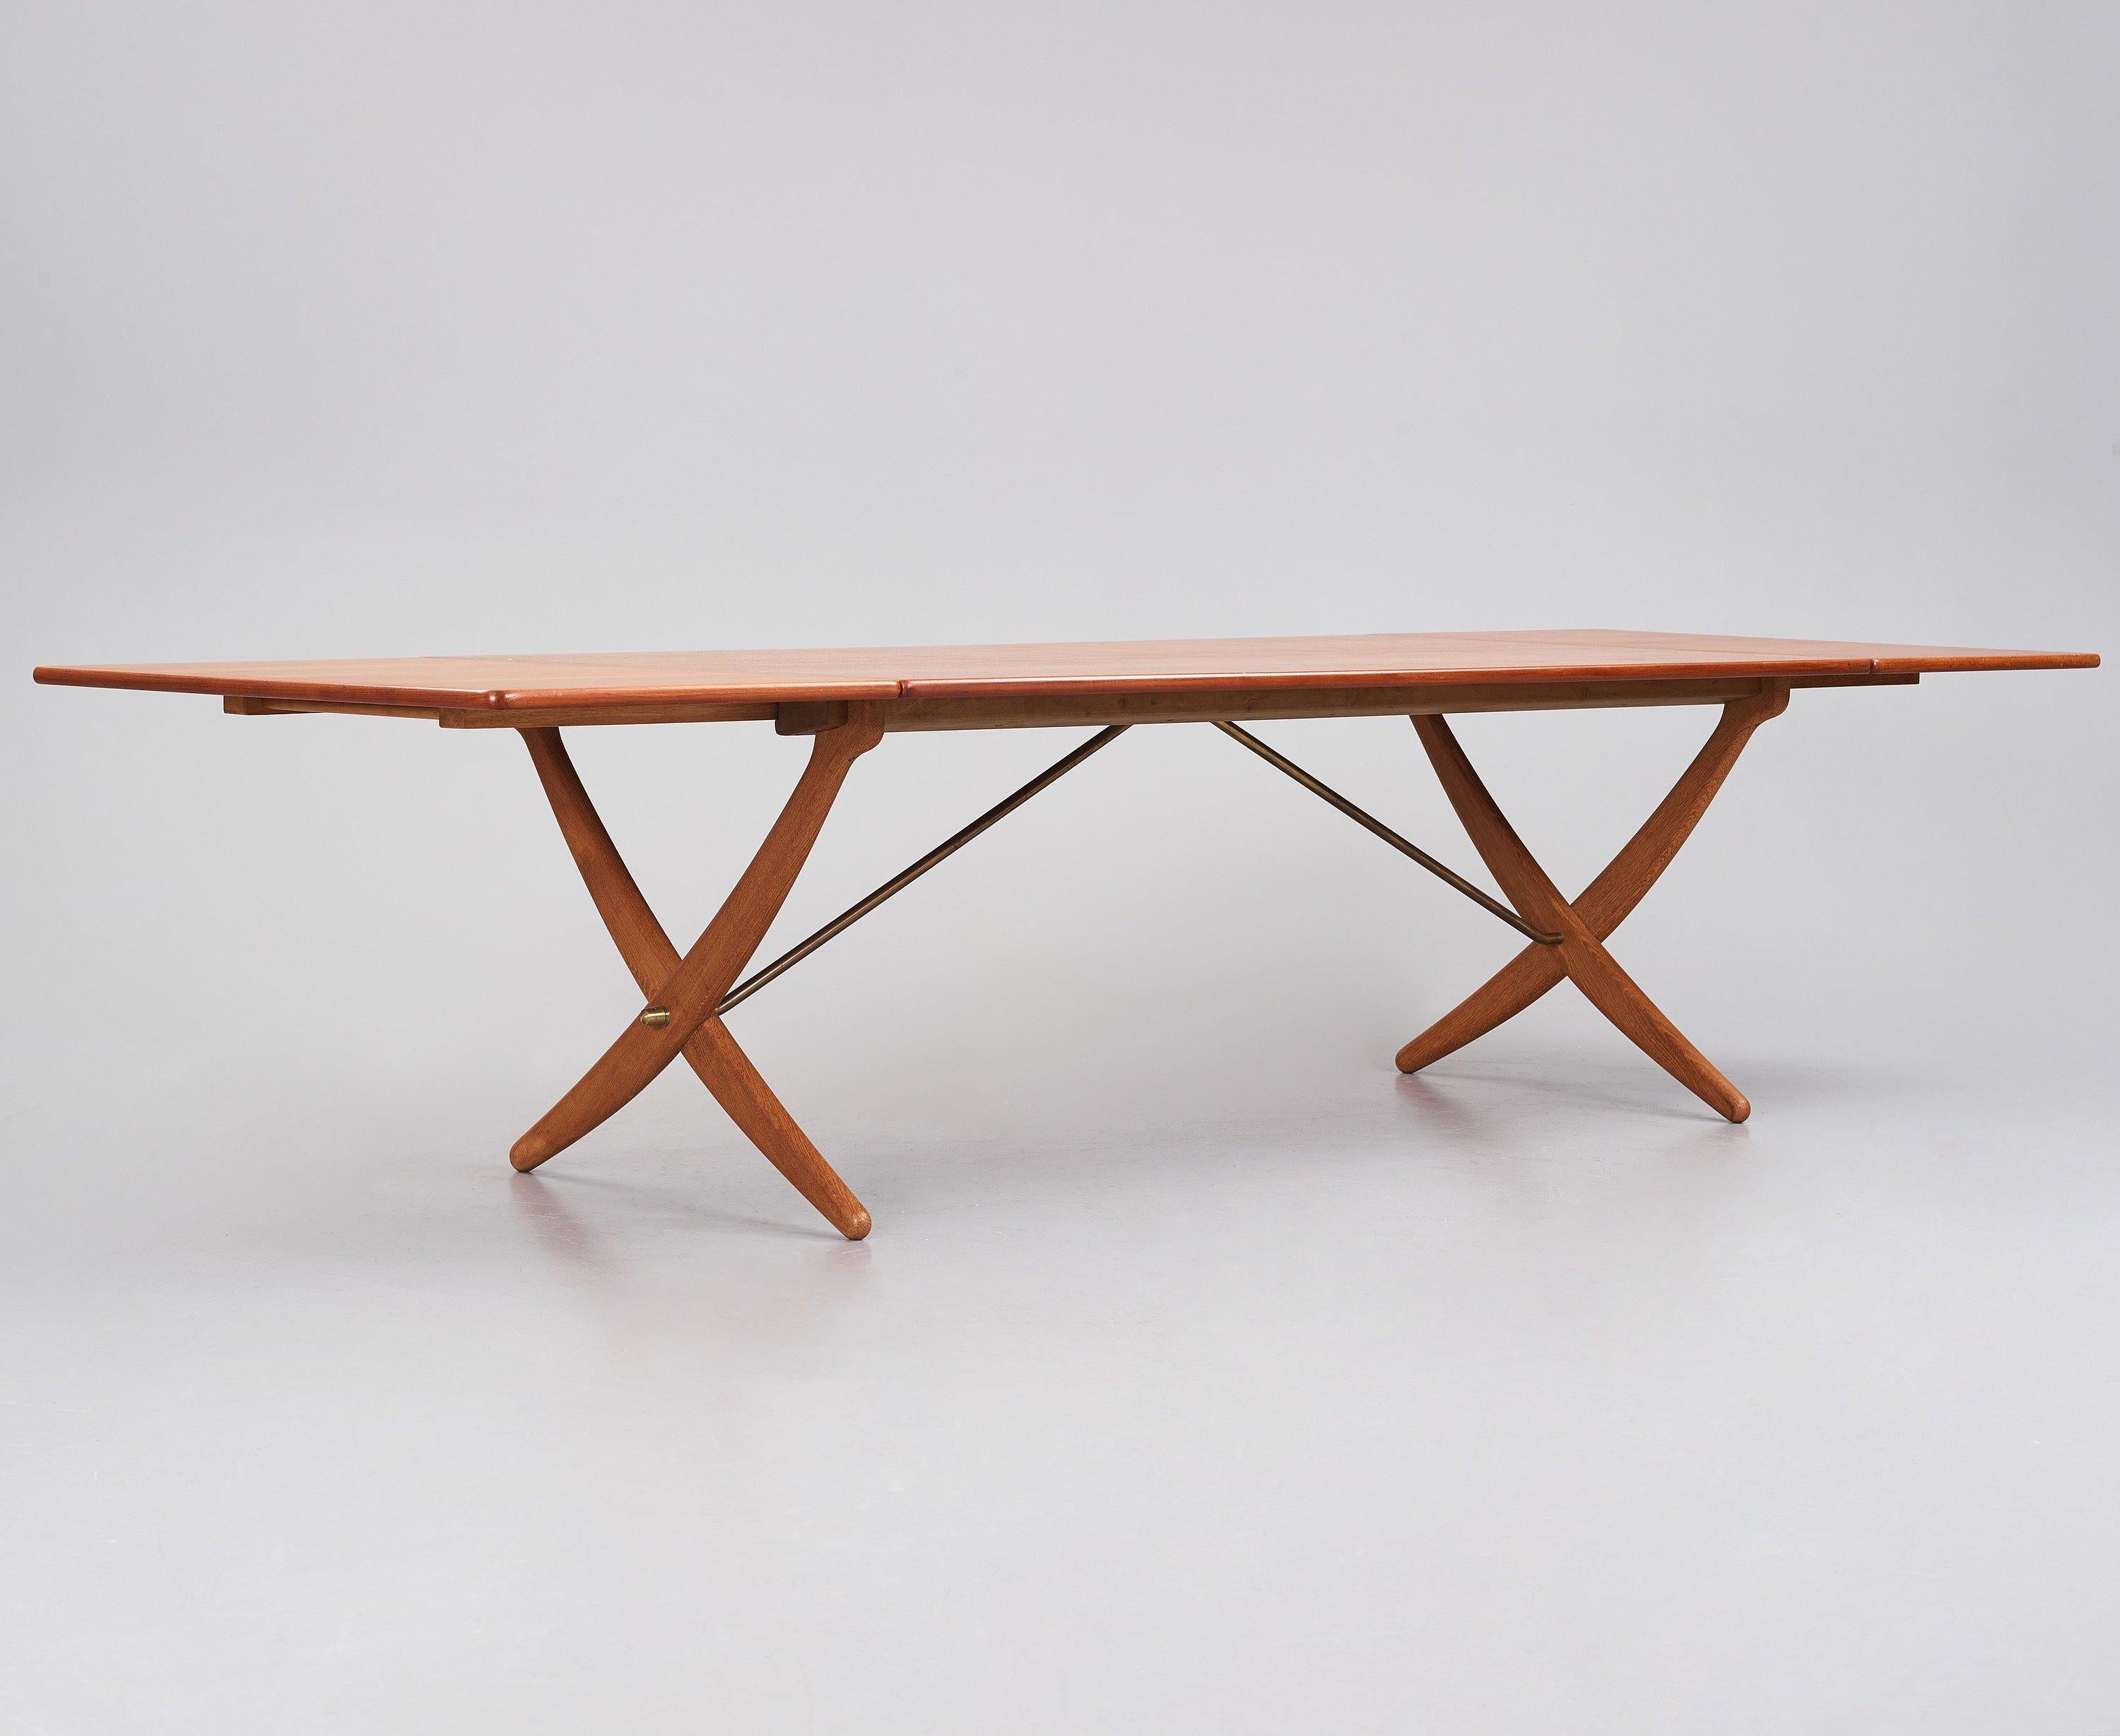 Mid-20th Century Danish Modern Sabre Table Model AT-314 by Hans Wegner, 1950's For Sale